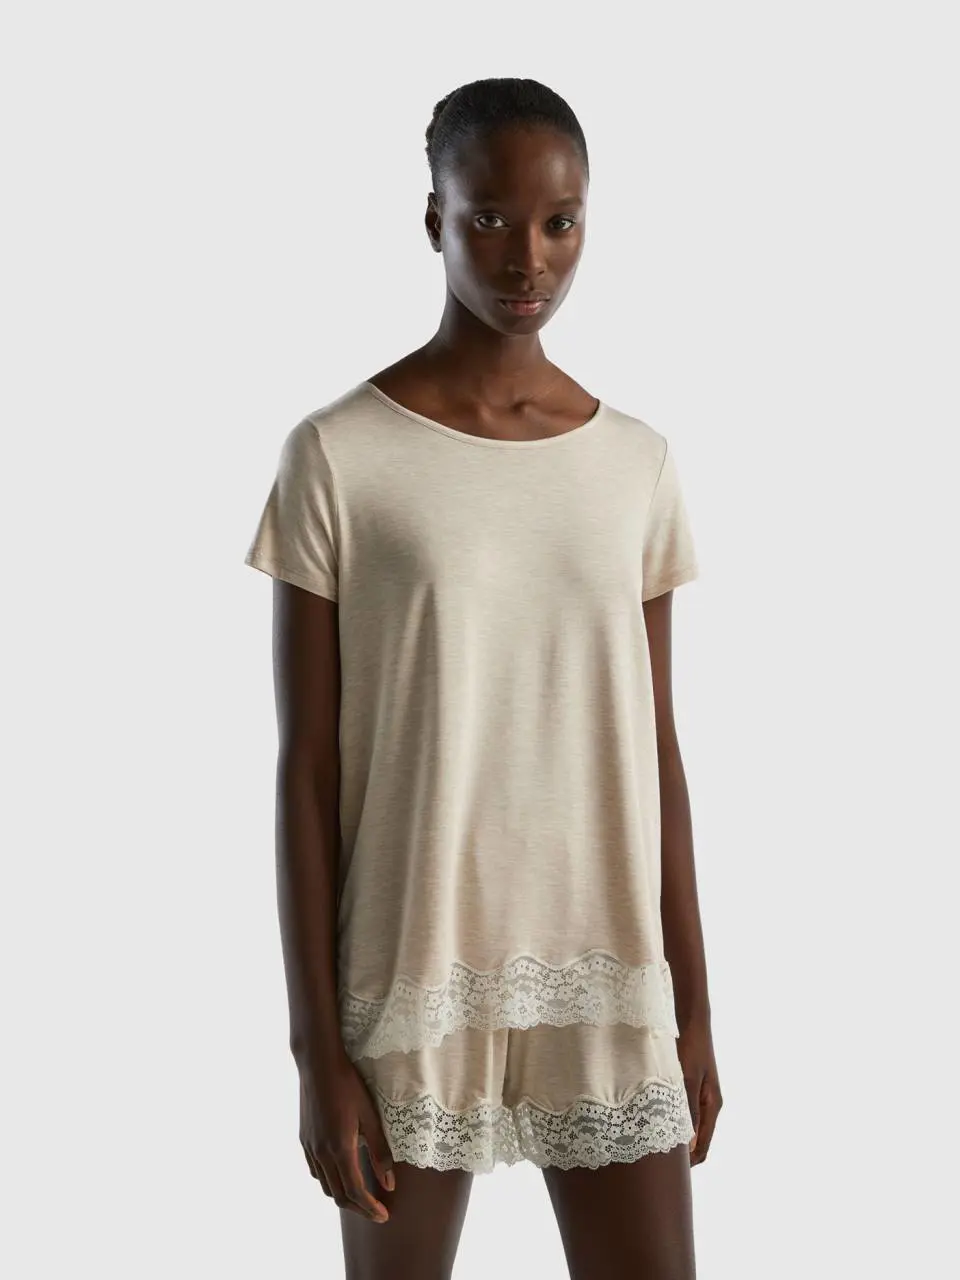 Benetton short sleeve t-shirts with lace. 1